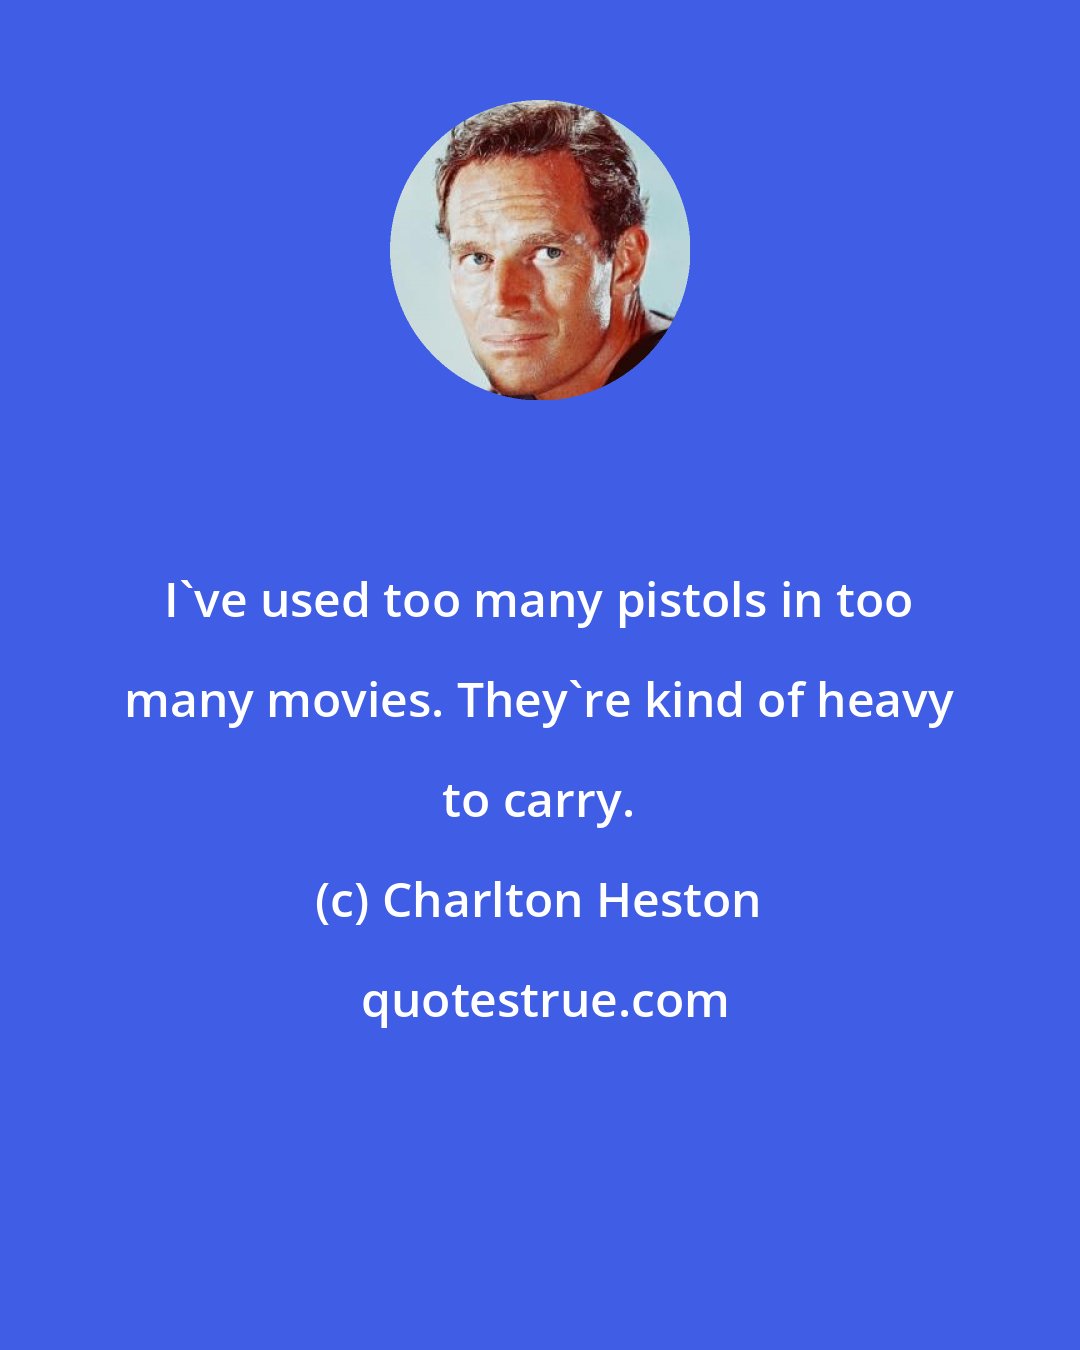 Charlton Heston: I've used too many pistols in too many movies. They're kind of heavy to carry.